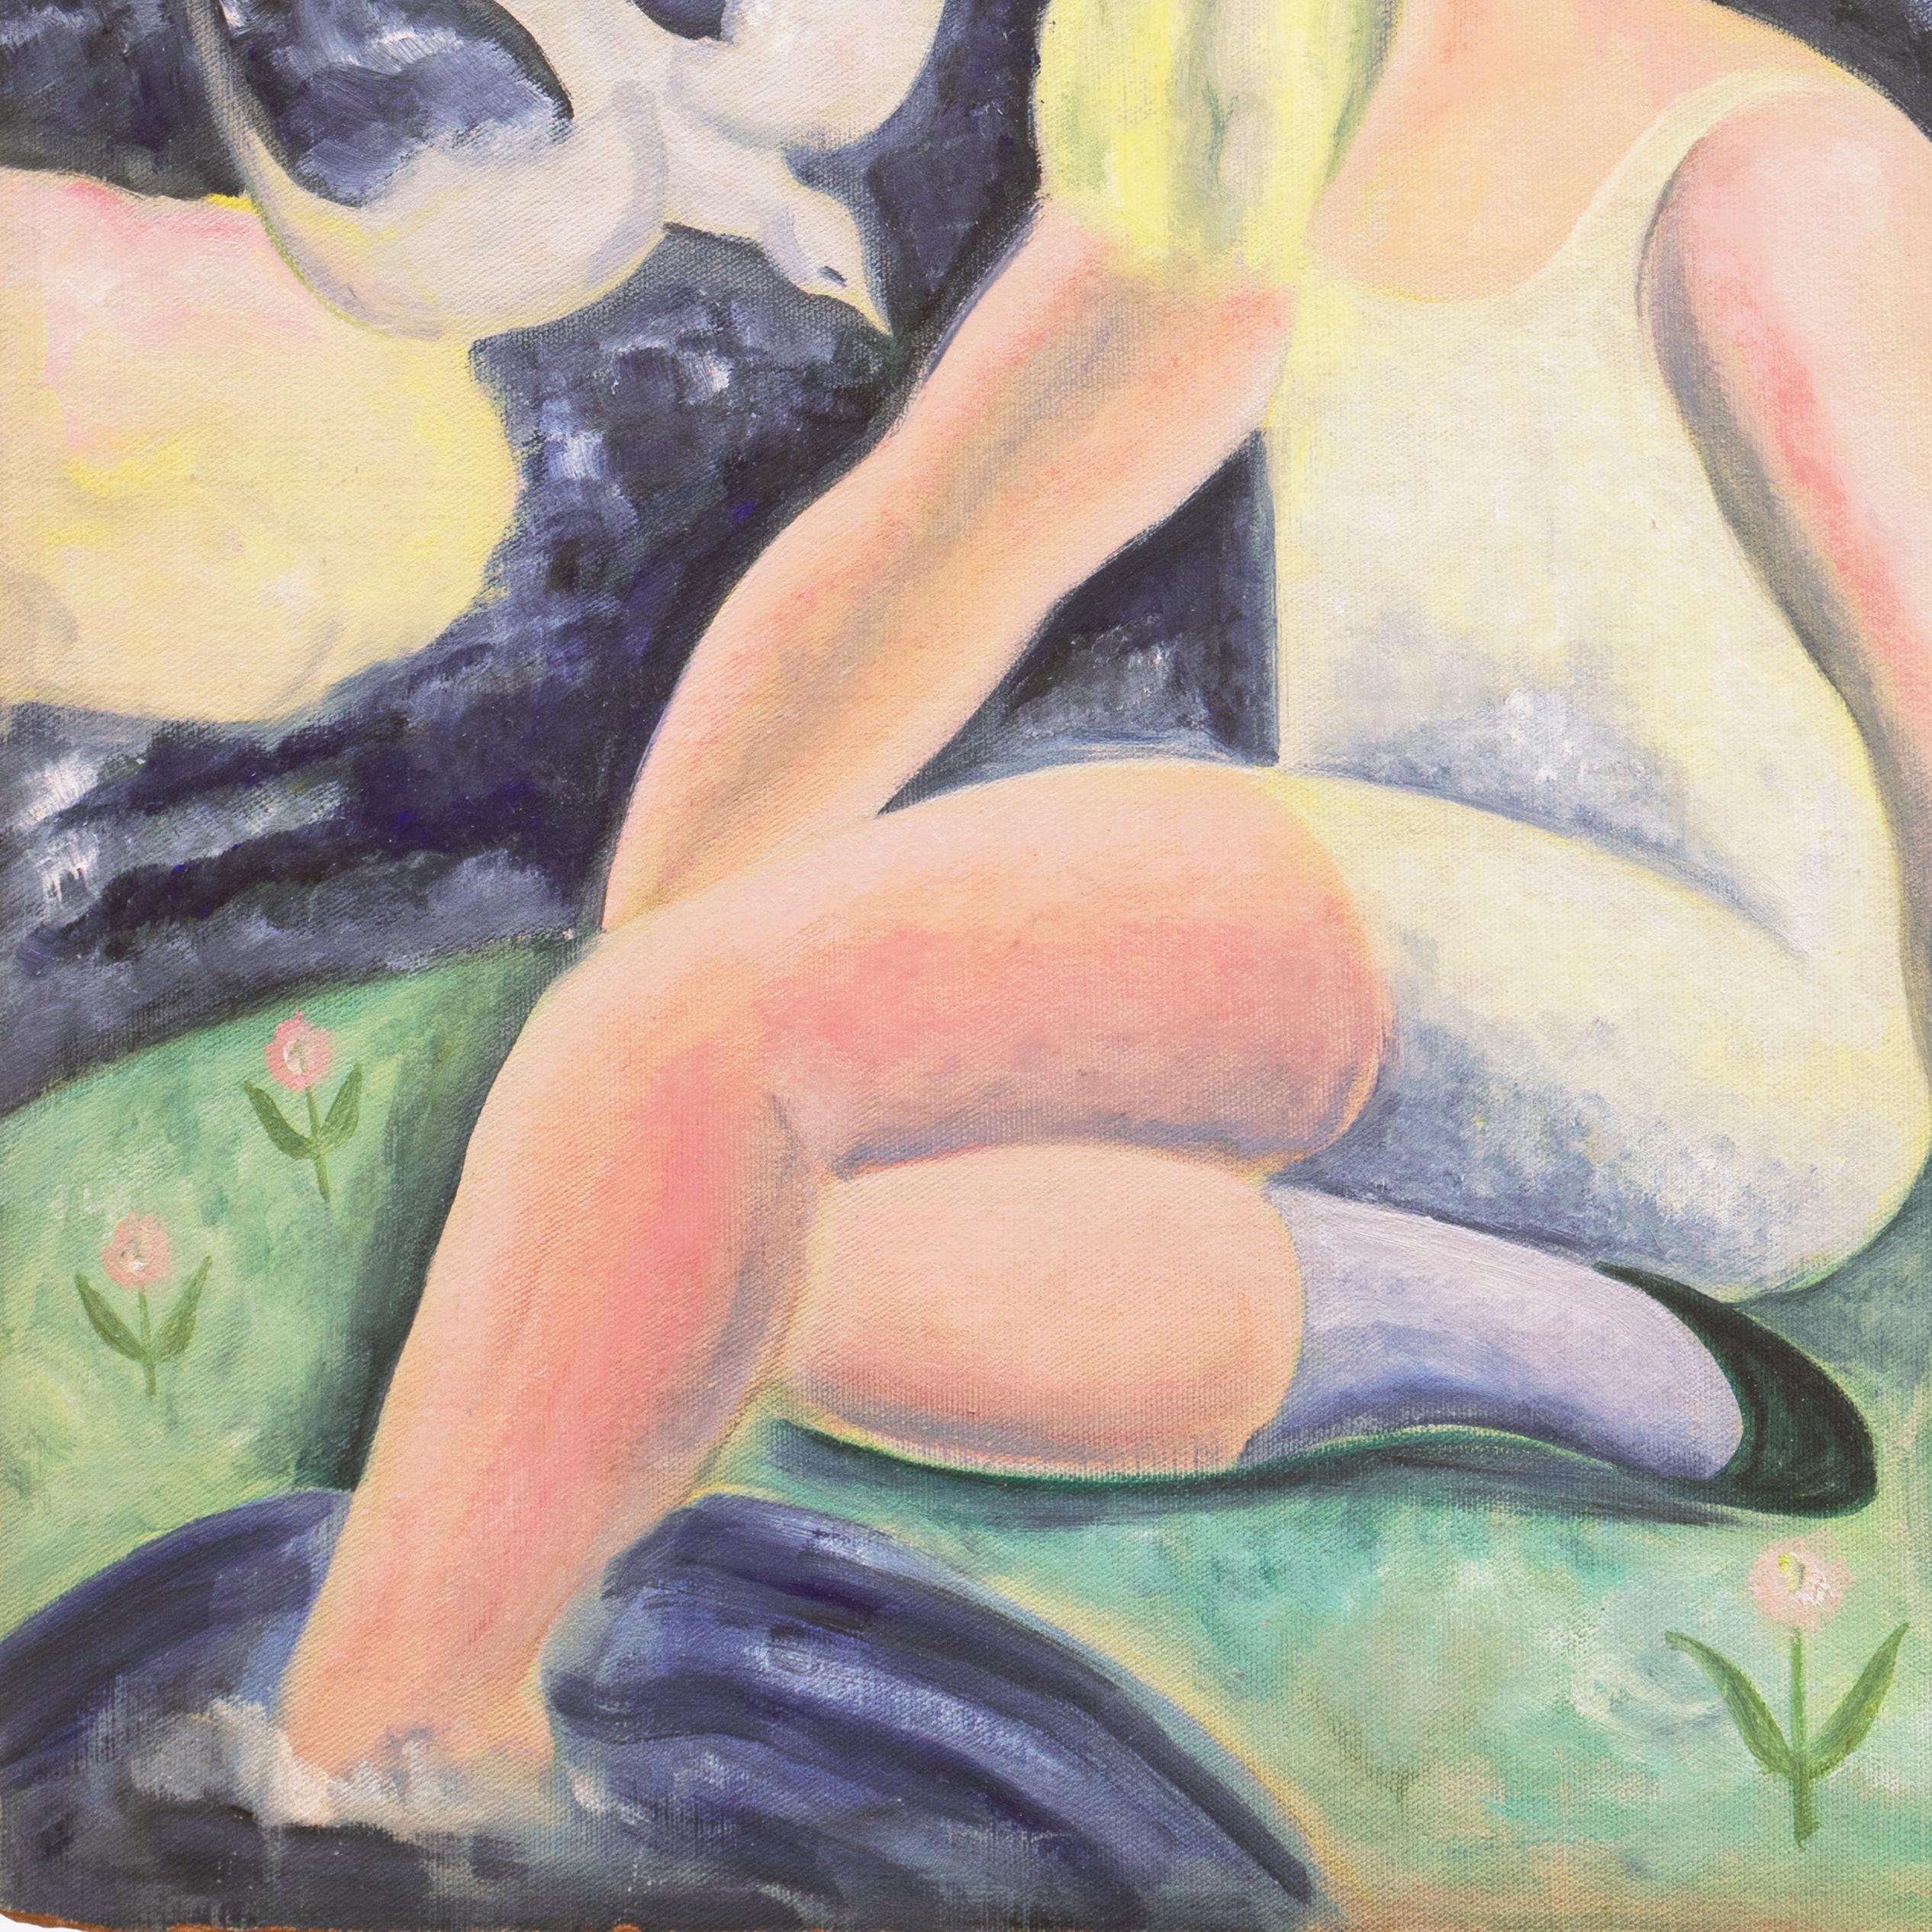 A view of a landscape with a young woman shown seated and bathing her bare foot in a pool of water with white doves flying in a clouded, blue sky. 

Signed verso 'Nura' for Nura Woodson Ulreich (American, 1899–1950) and painted circa 1935. Also